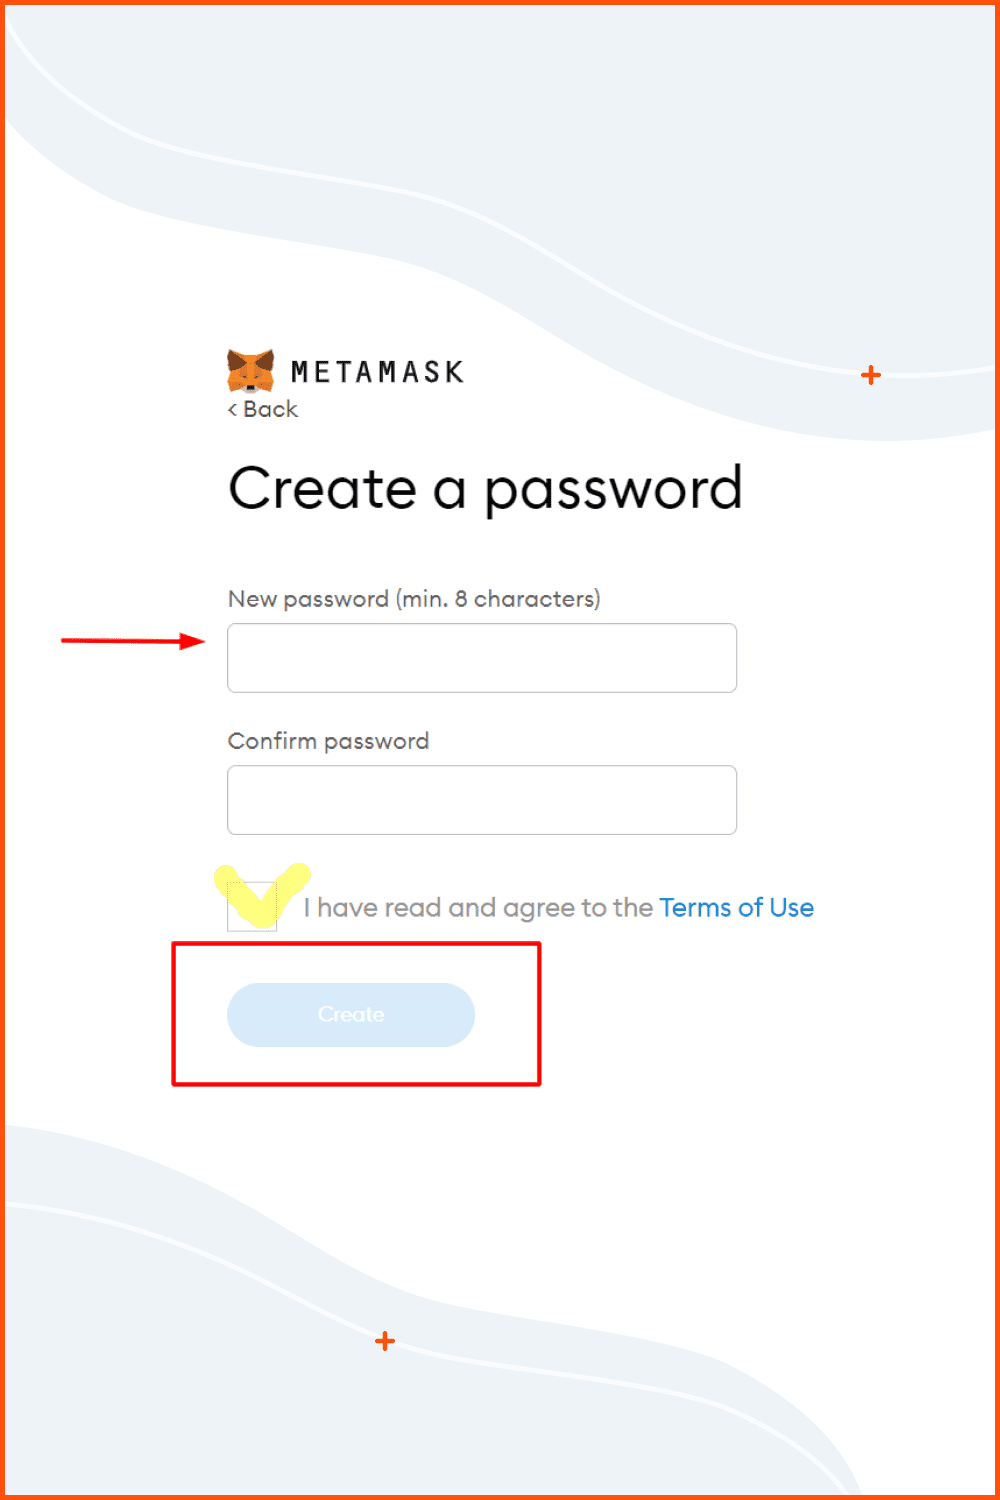 Create a password and agree to the terms and conditions of the service after you read them.